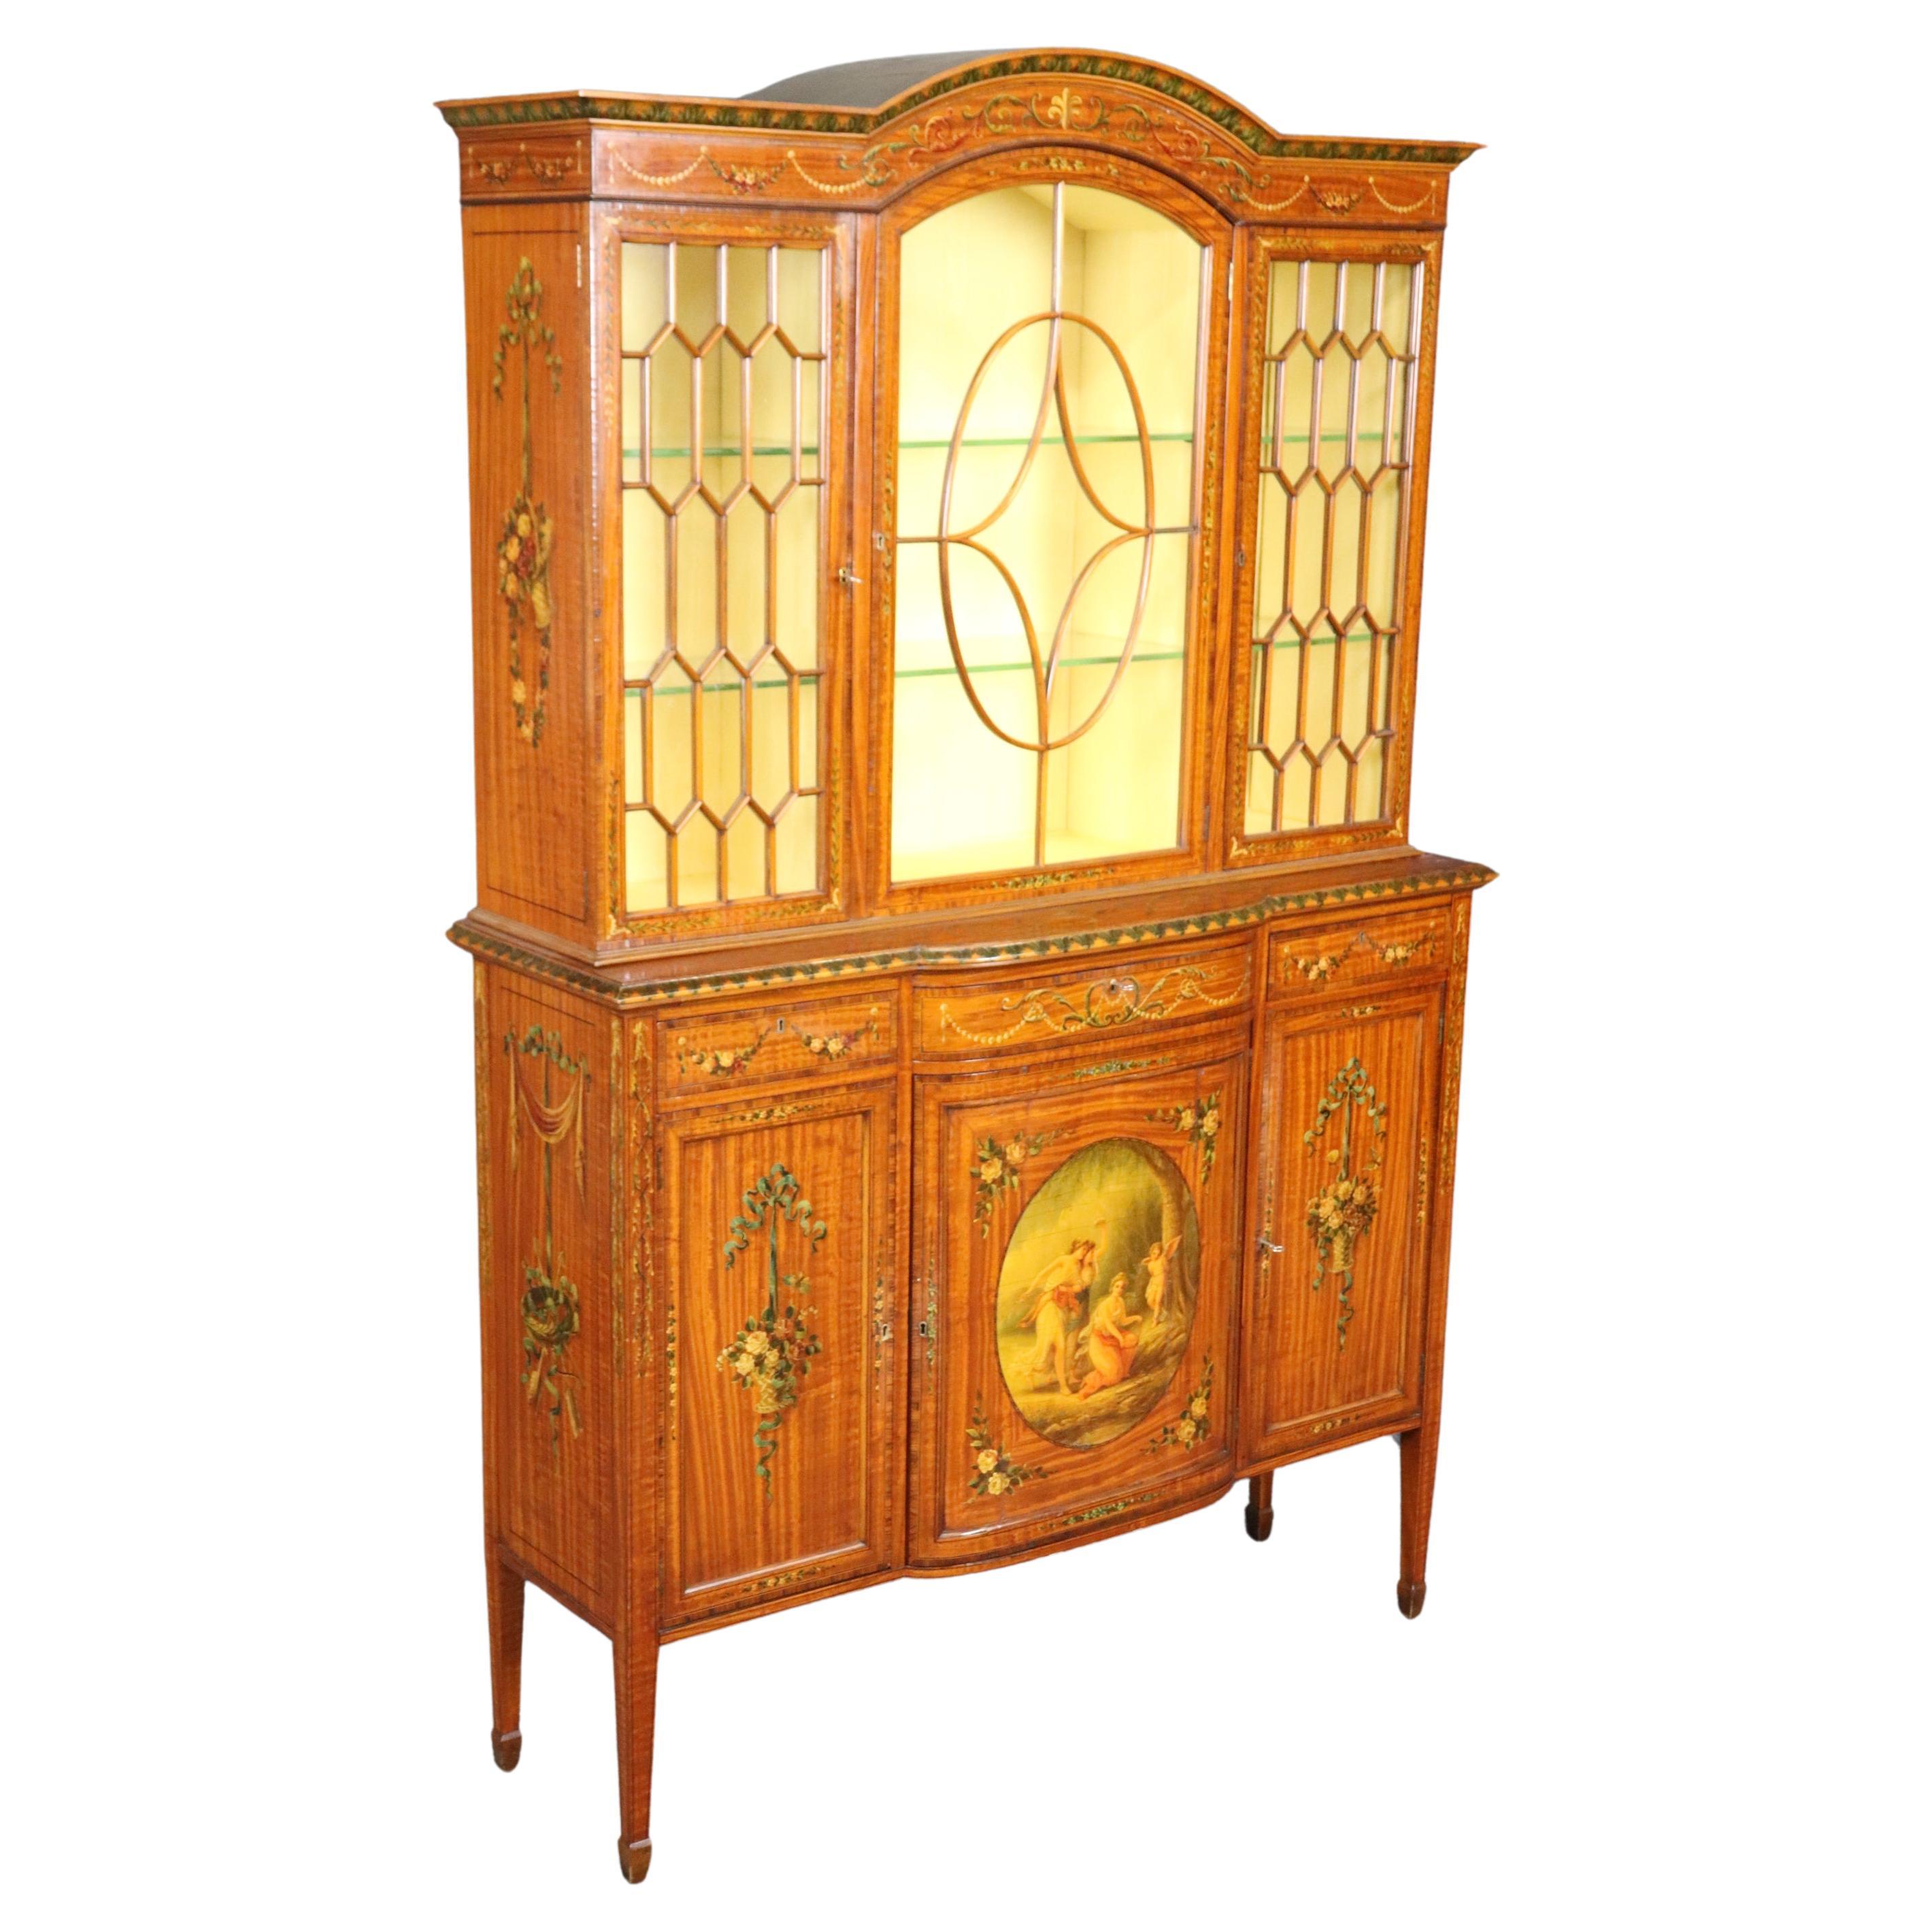 Rare Satinwood Vernis Martin Paint Decorated Adams Style Vitrine China Cabinet For Sale